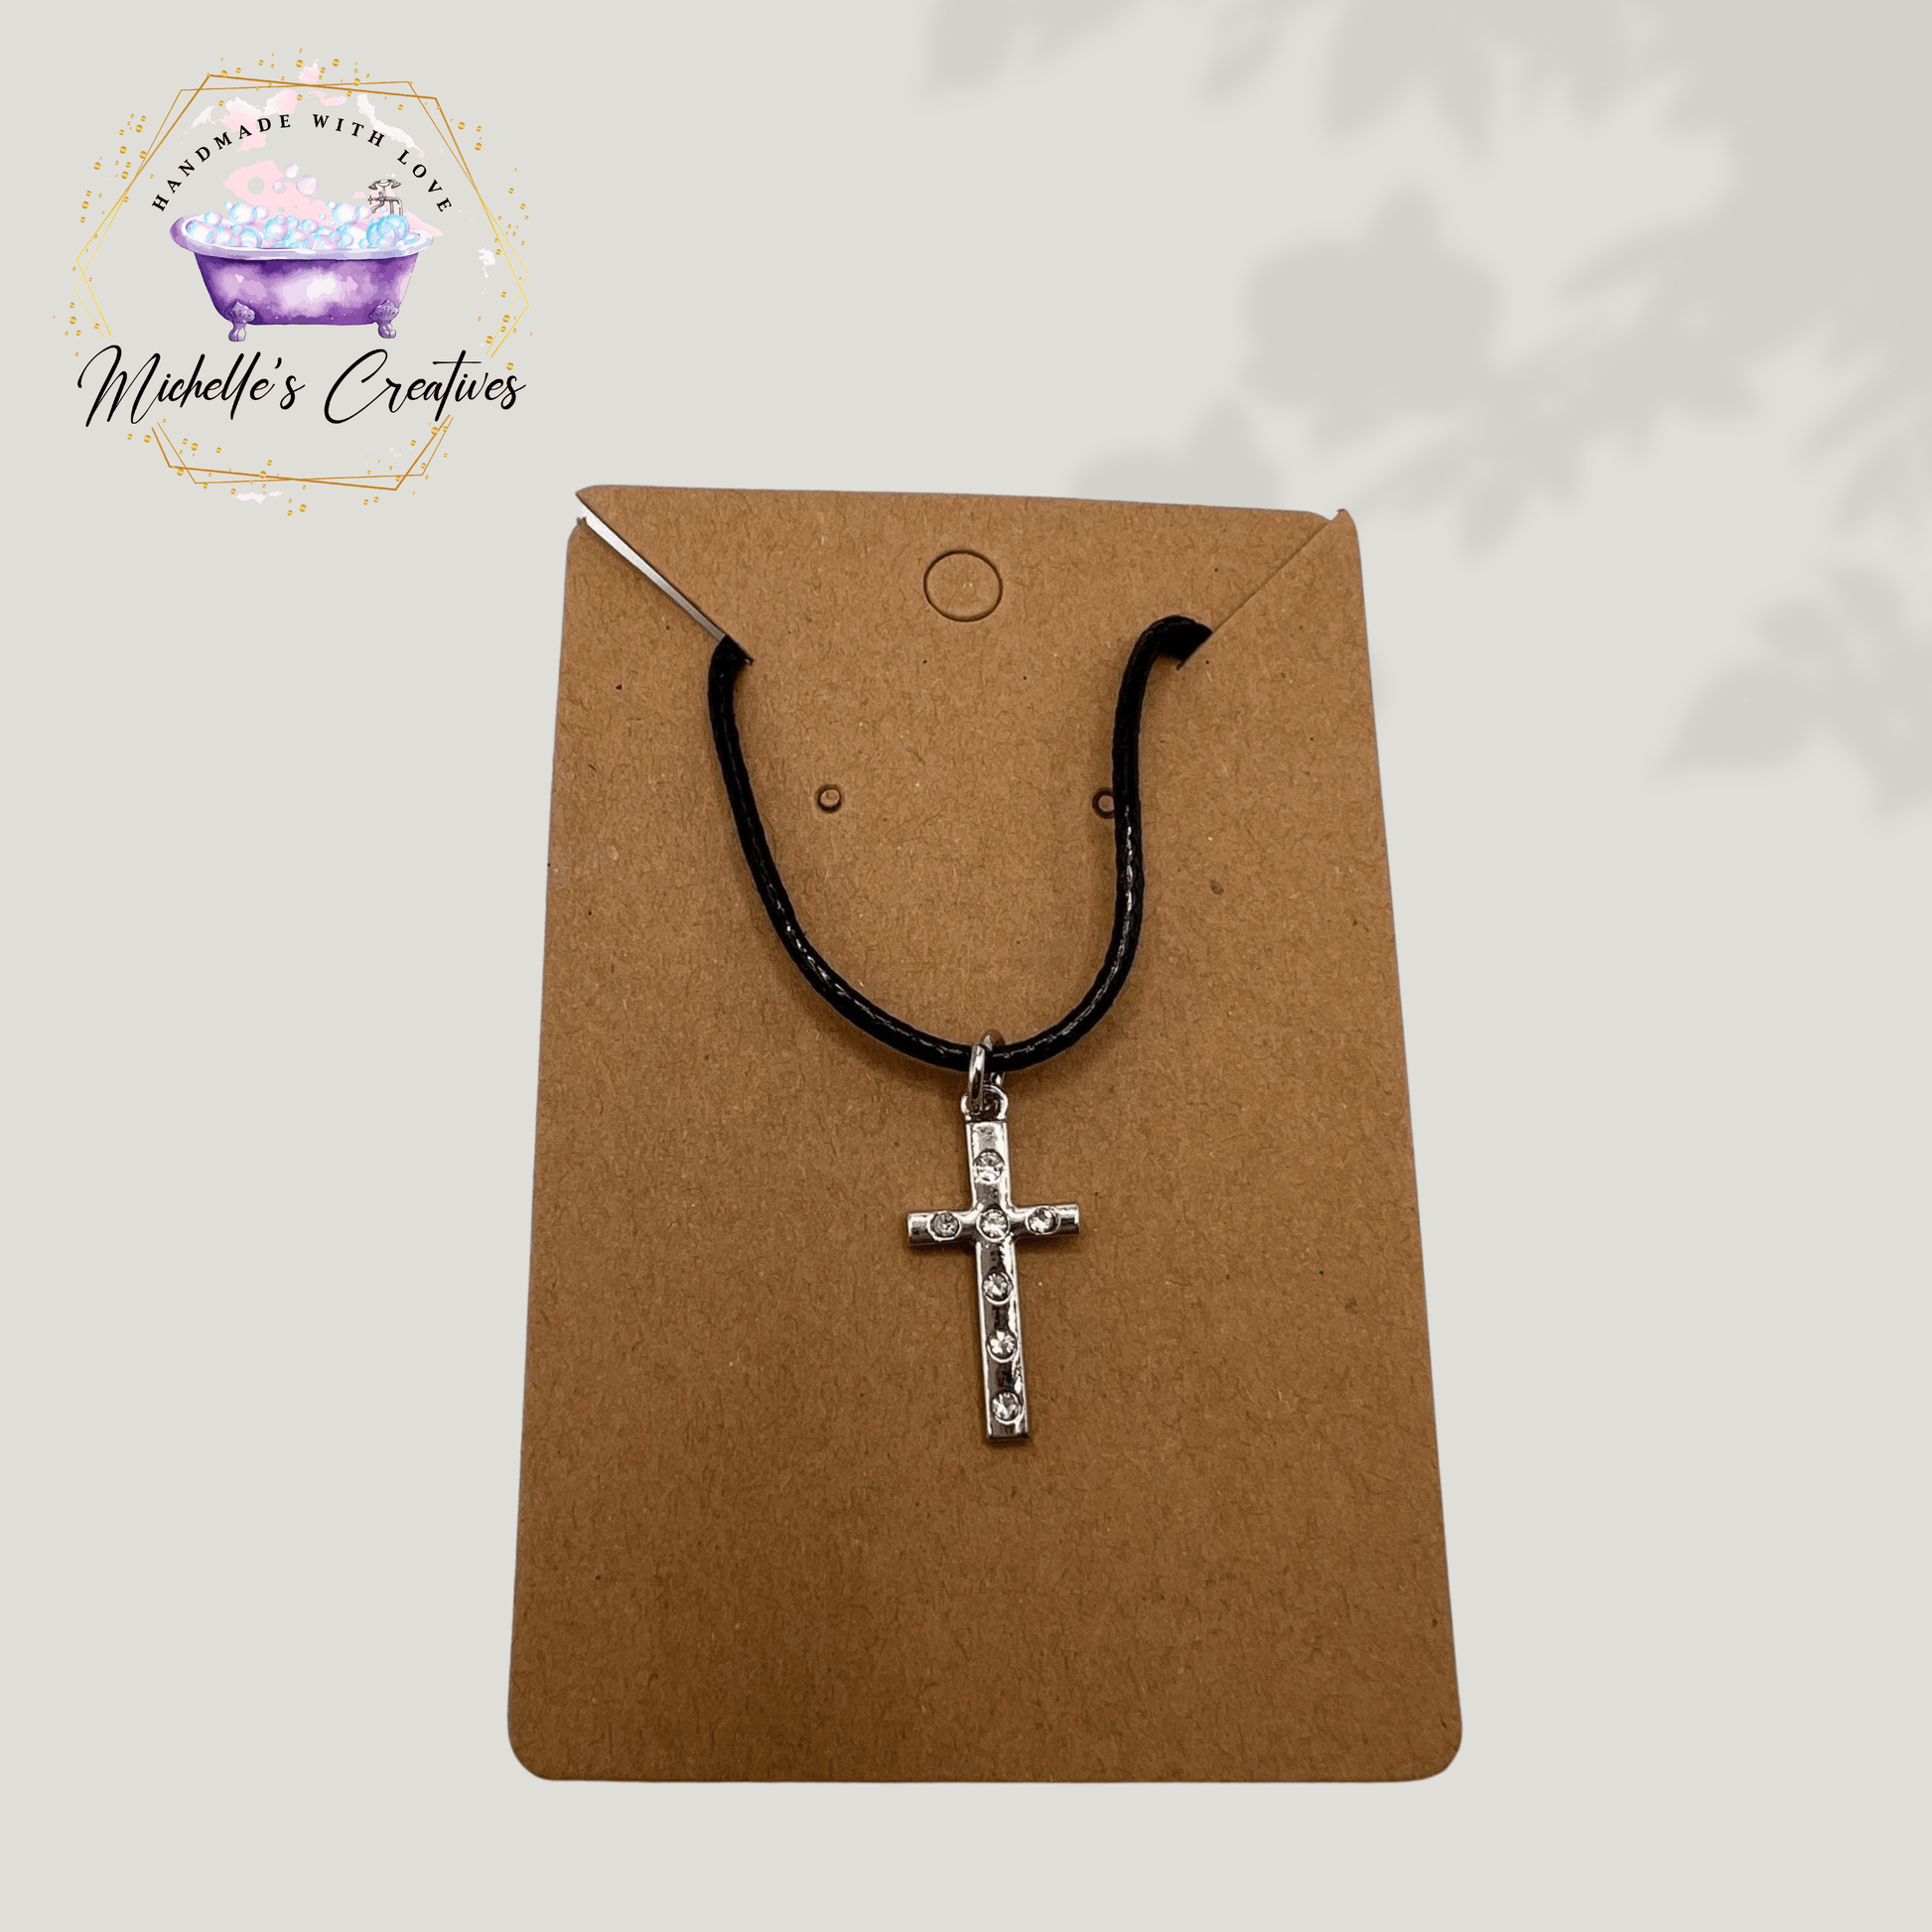 Michelle's Creatives Necklace 20 inch Cross Necklace on Black Waxed Cord with Clasp CROSS-NECKLACE-20